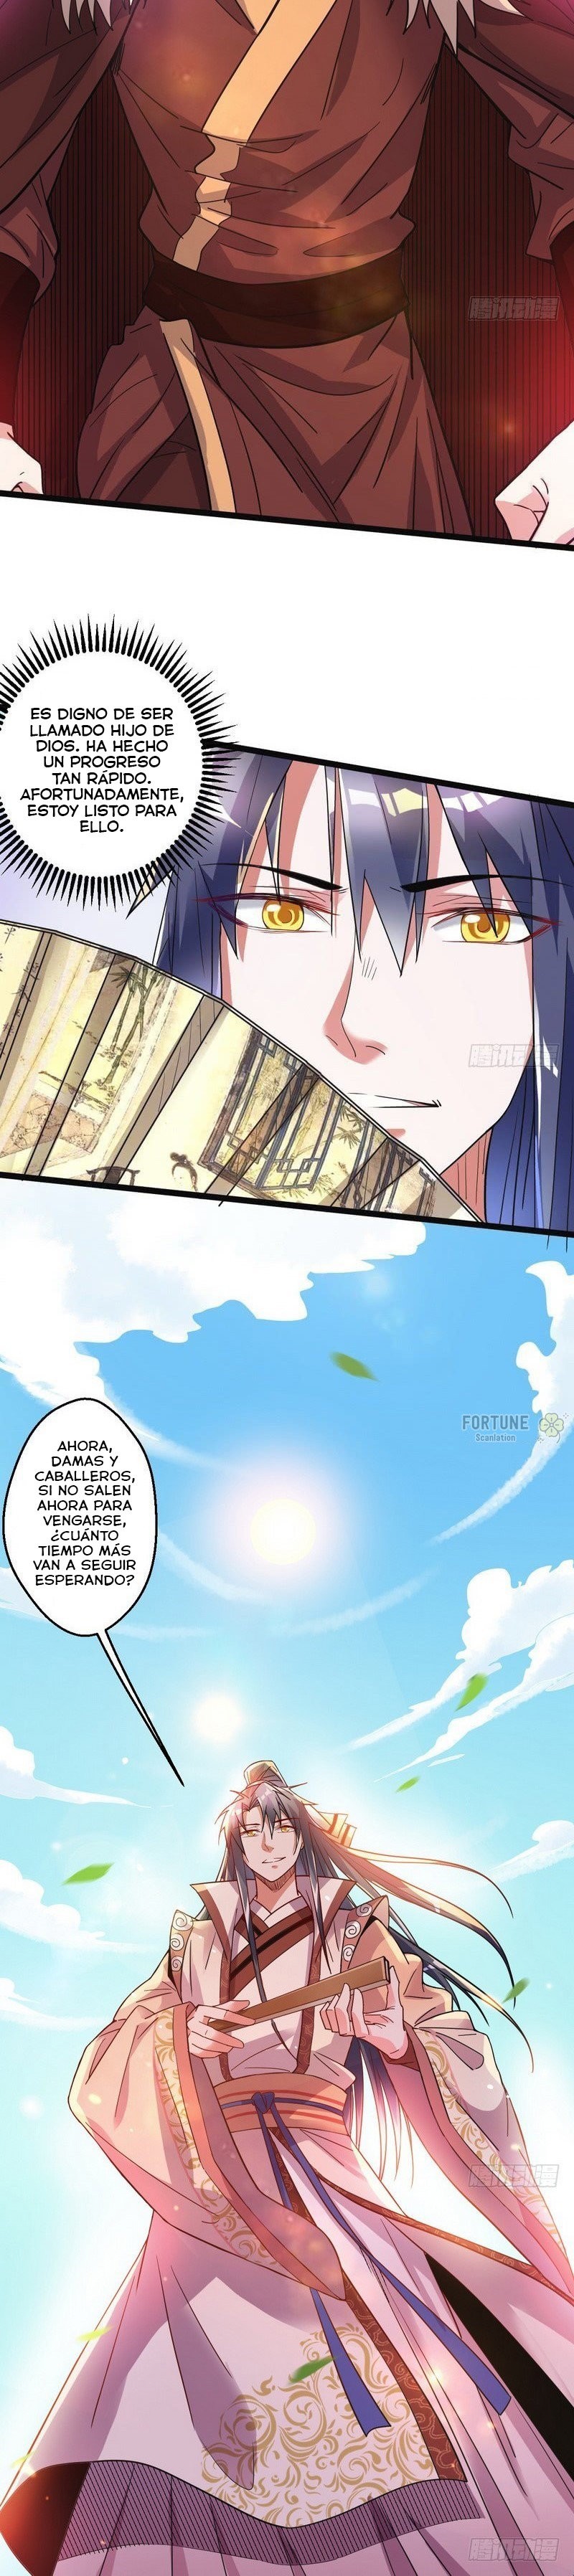 Manga Soy un dios maligno Chapter 7 image number 25